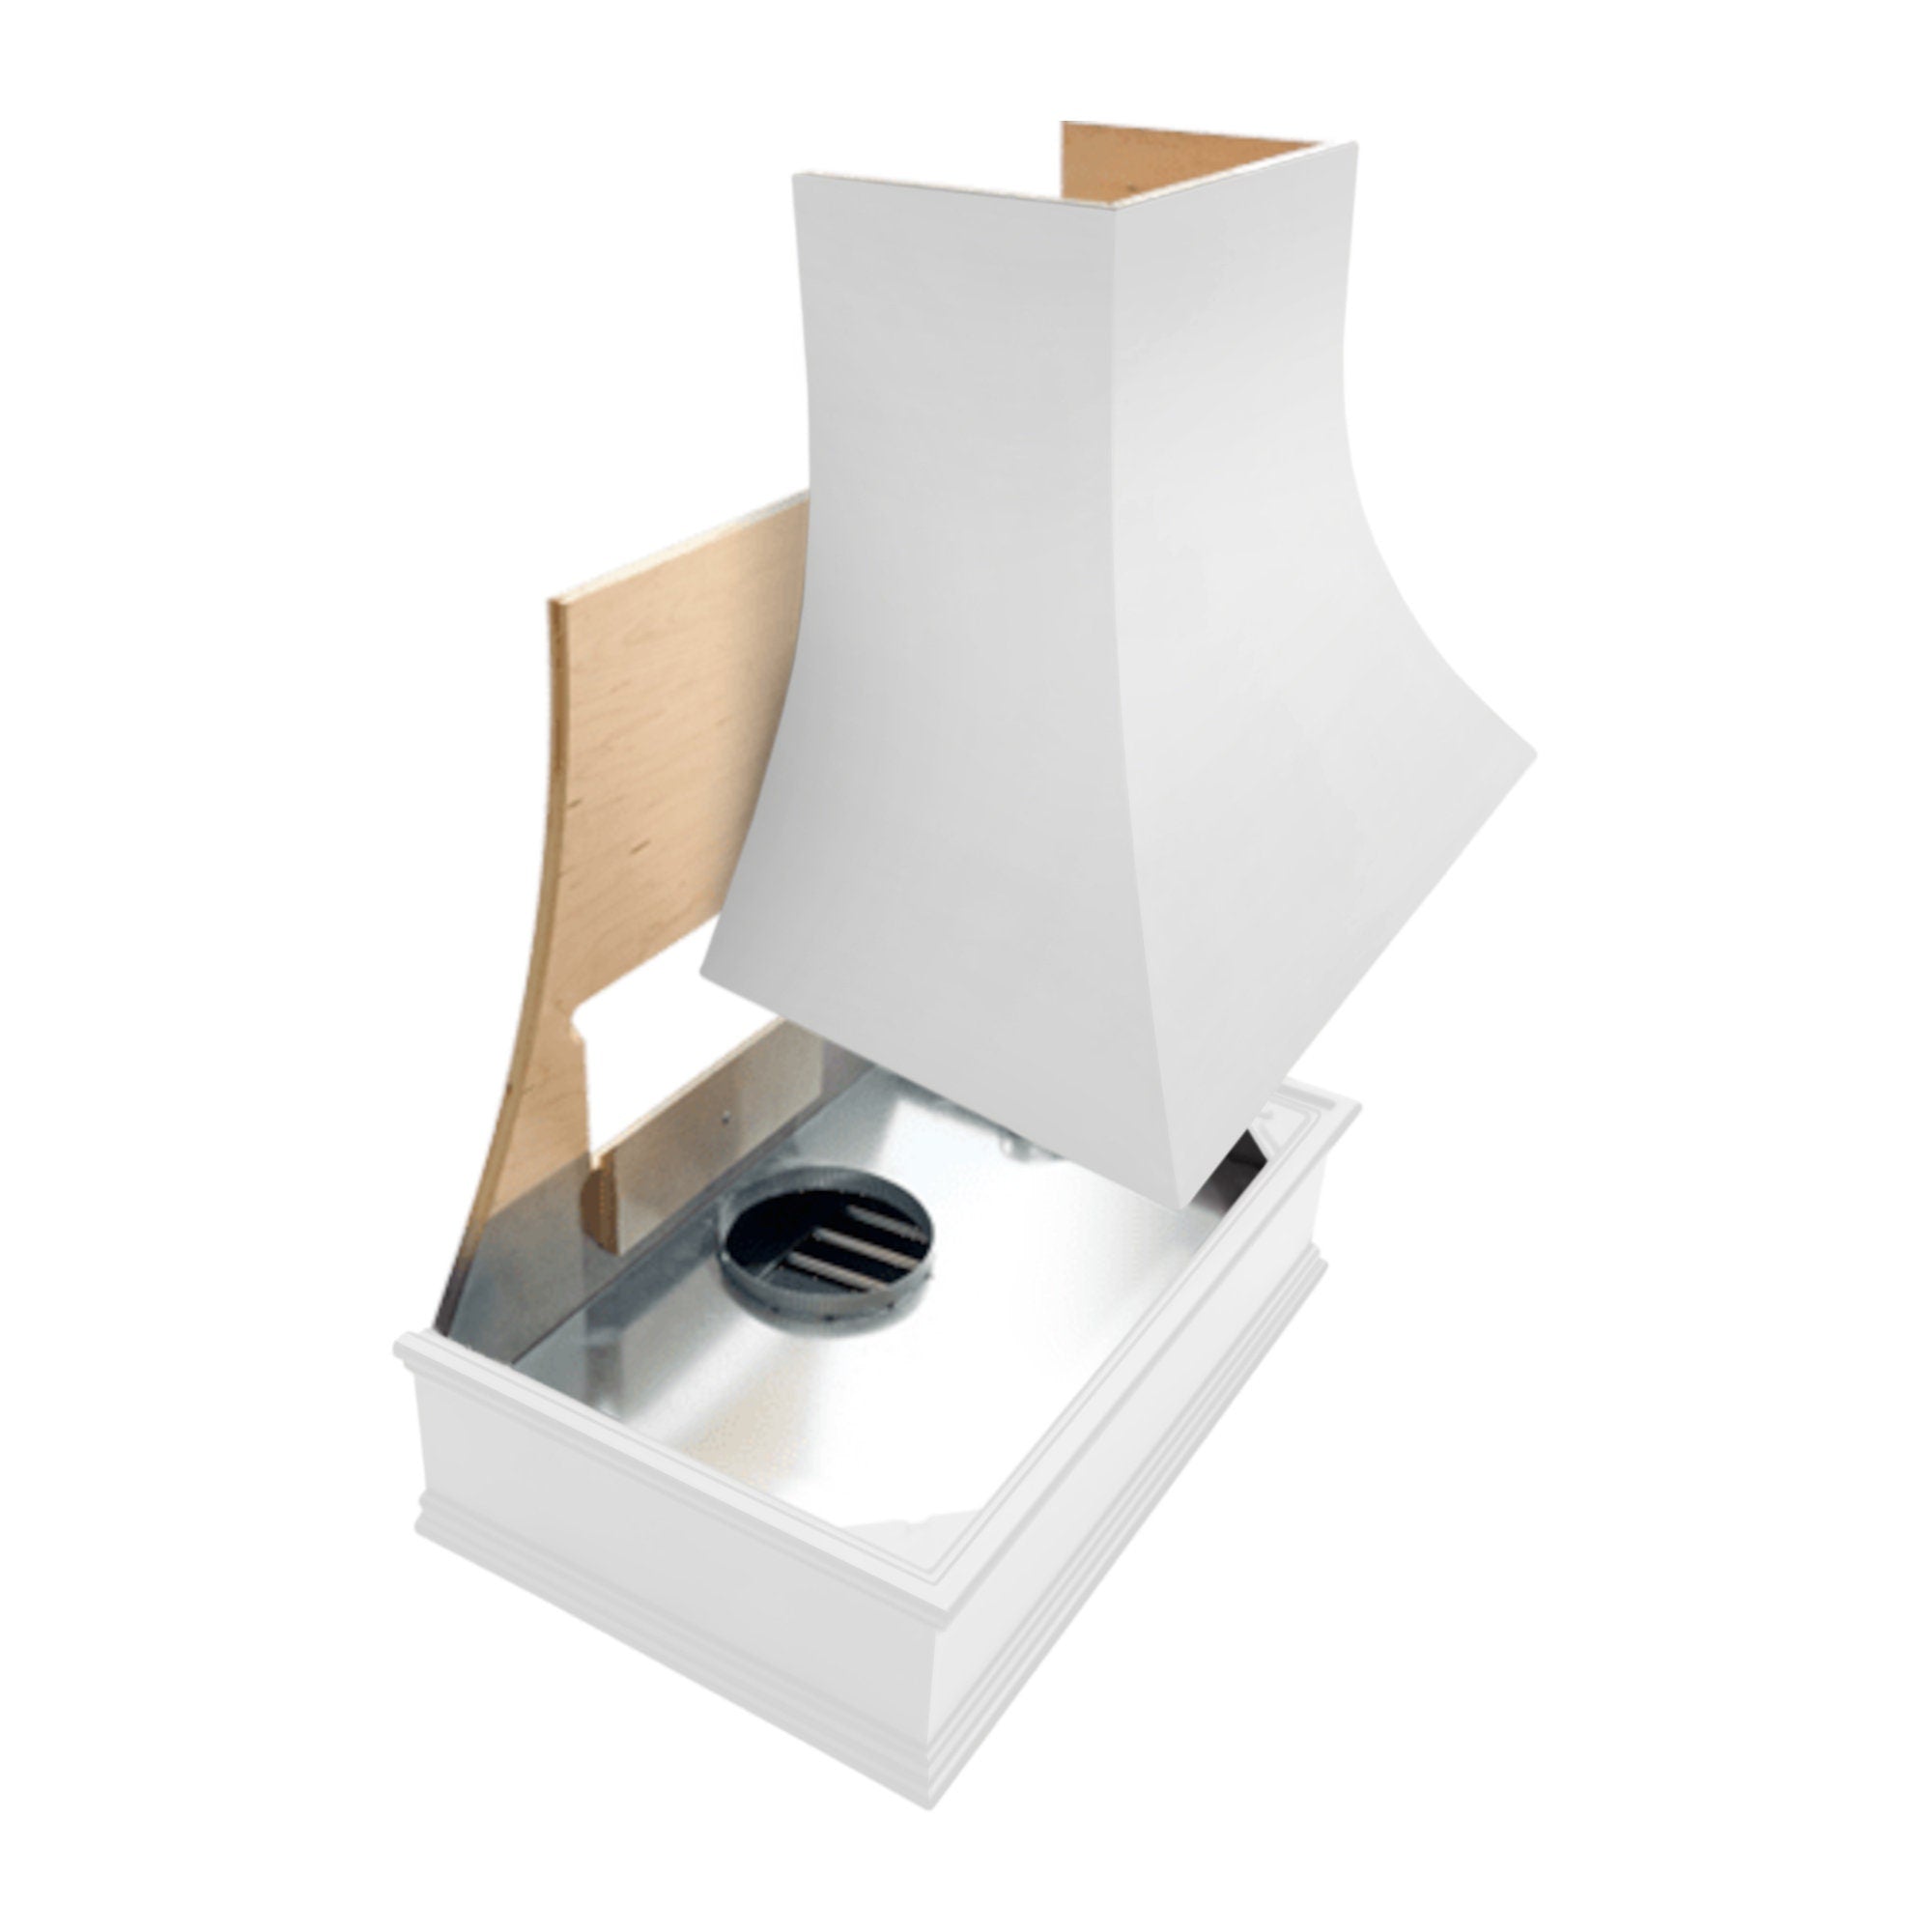 White Wood Range Hood With Tapered Strapped Front and Block Trim - 30", 36", 42", 48", 54" and 60" Widths Available